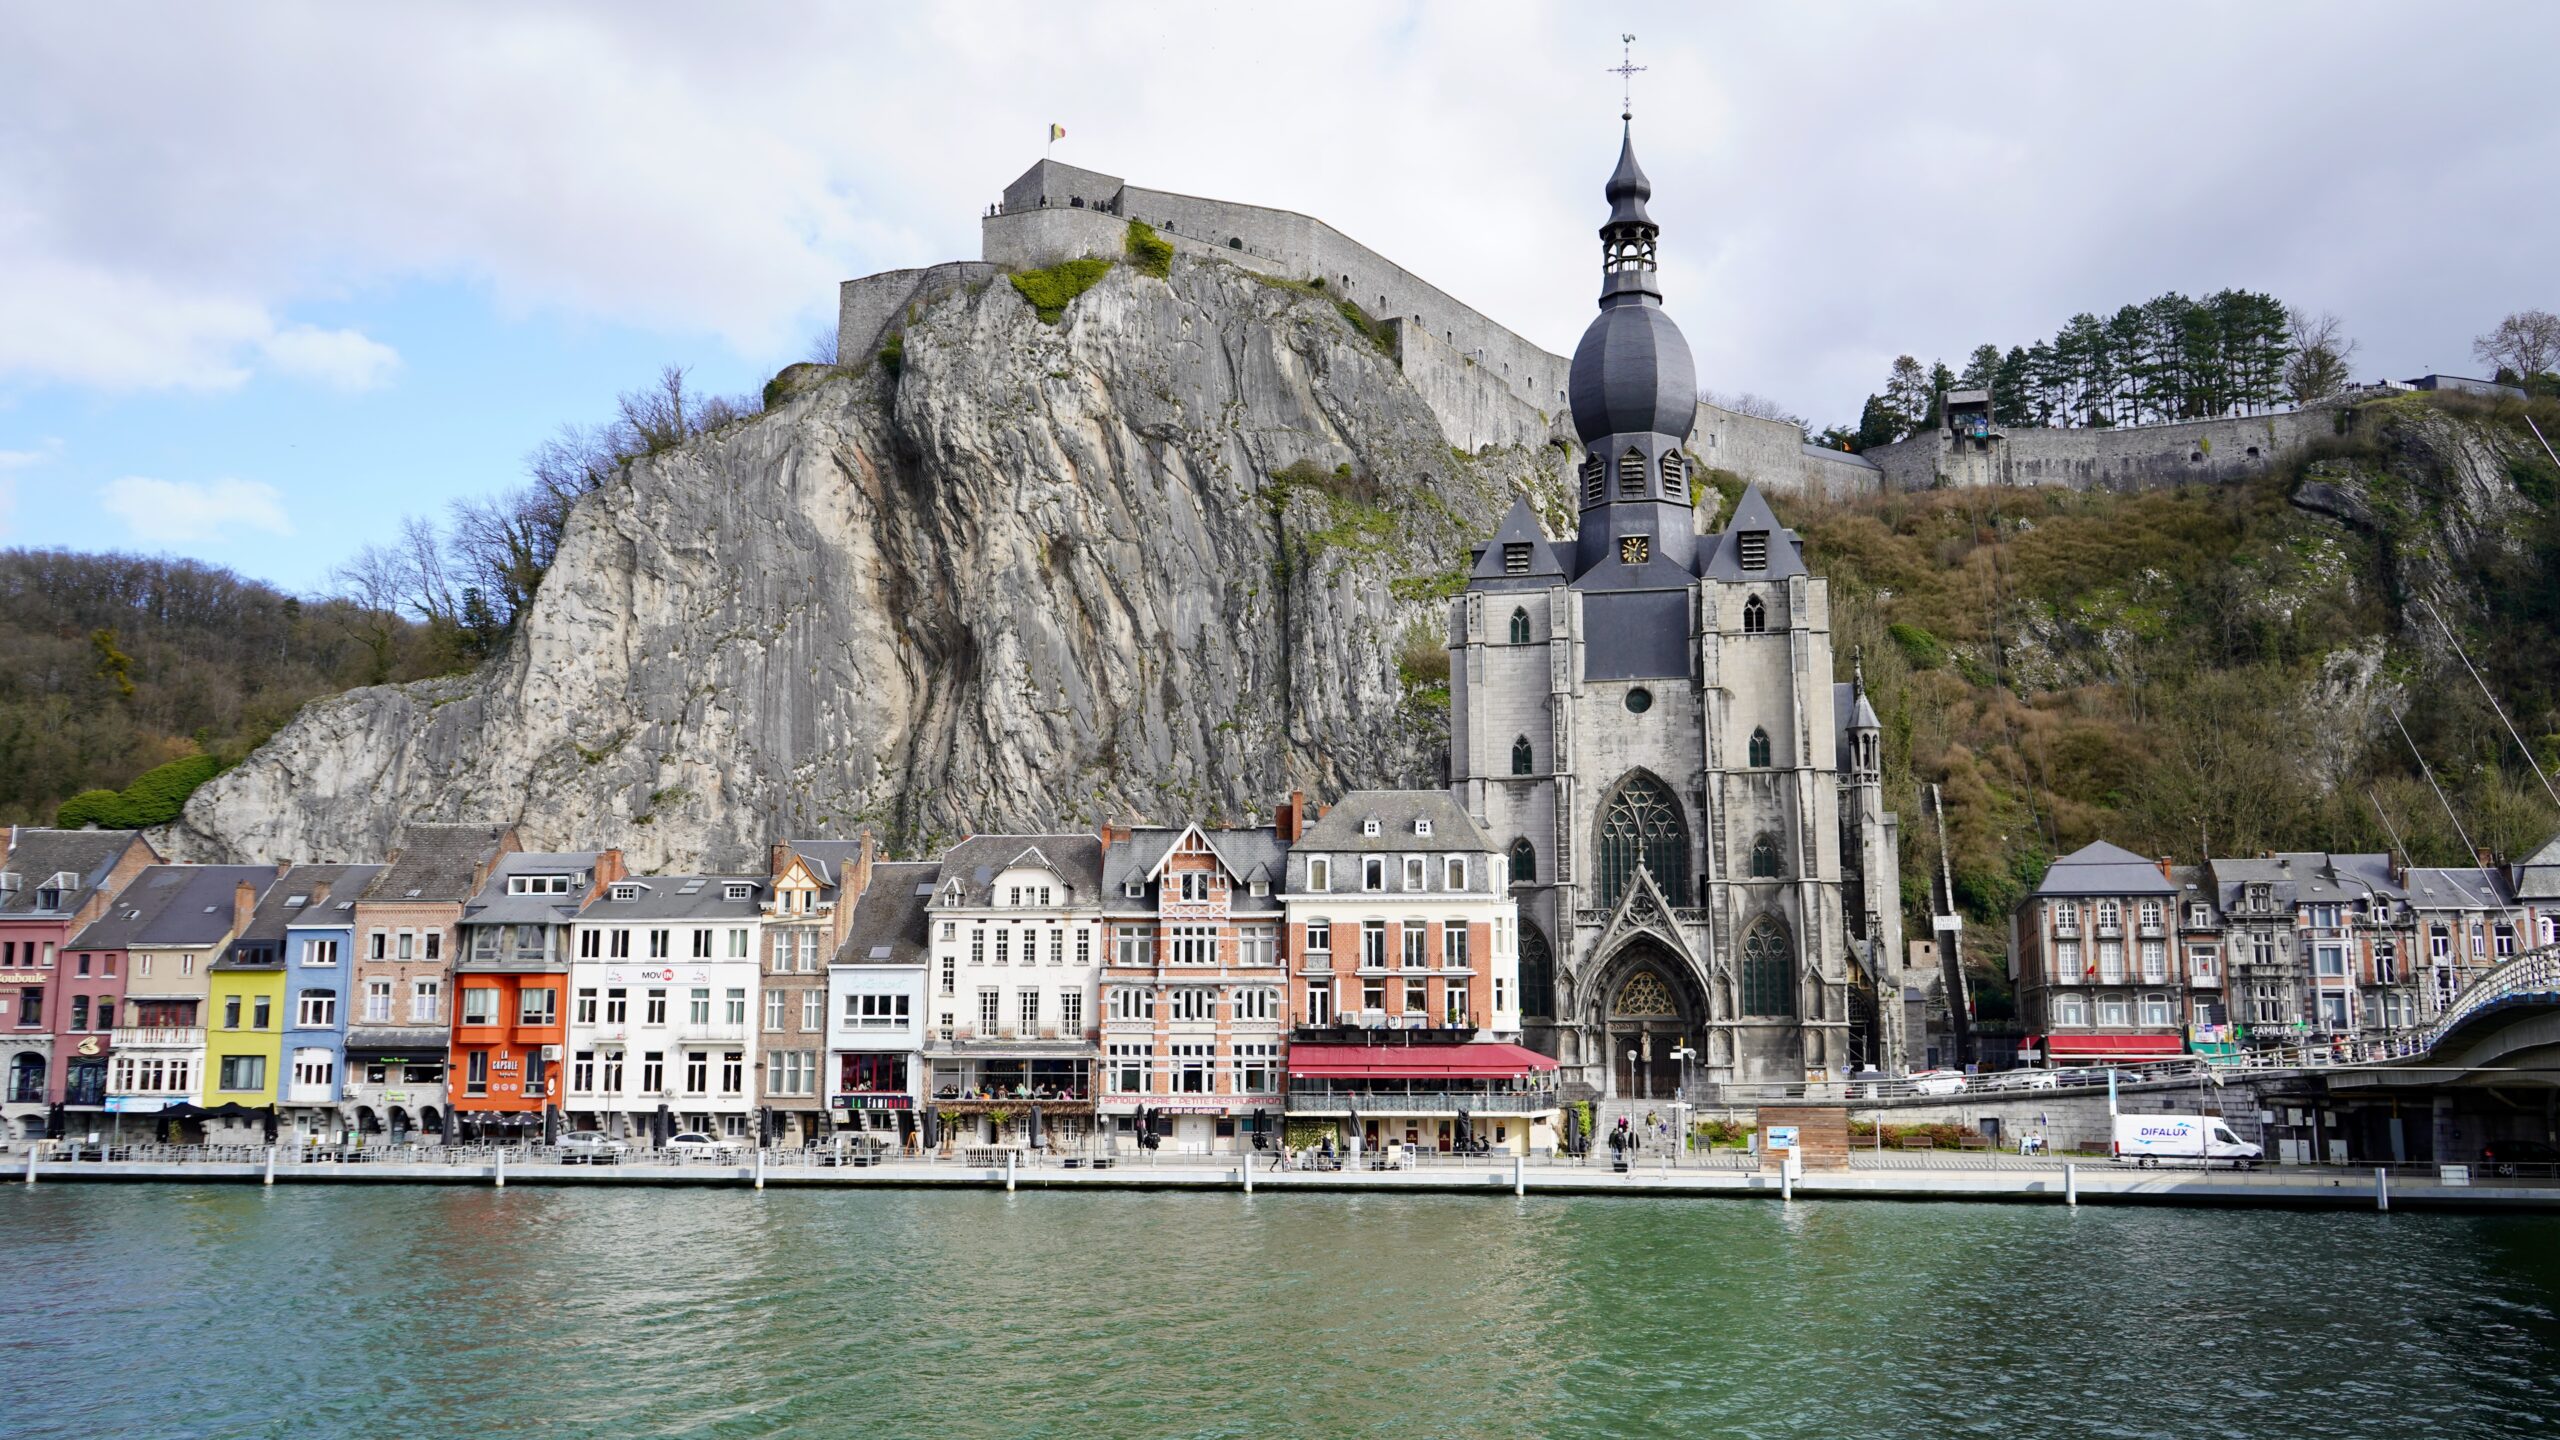 Dinant skyline with the church and citadel with row houses along the river